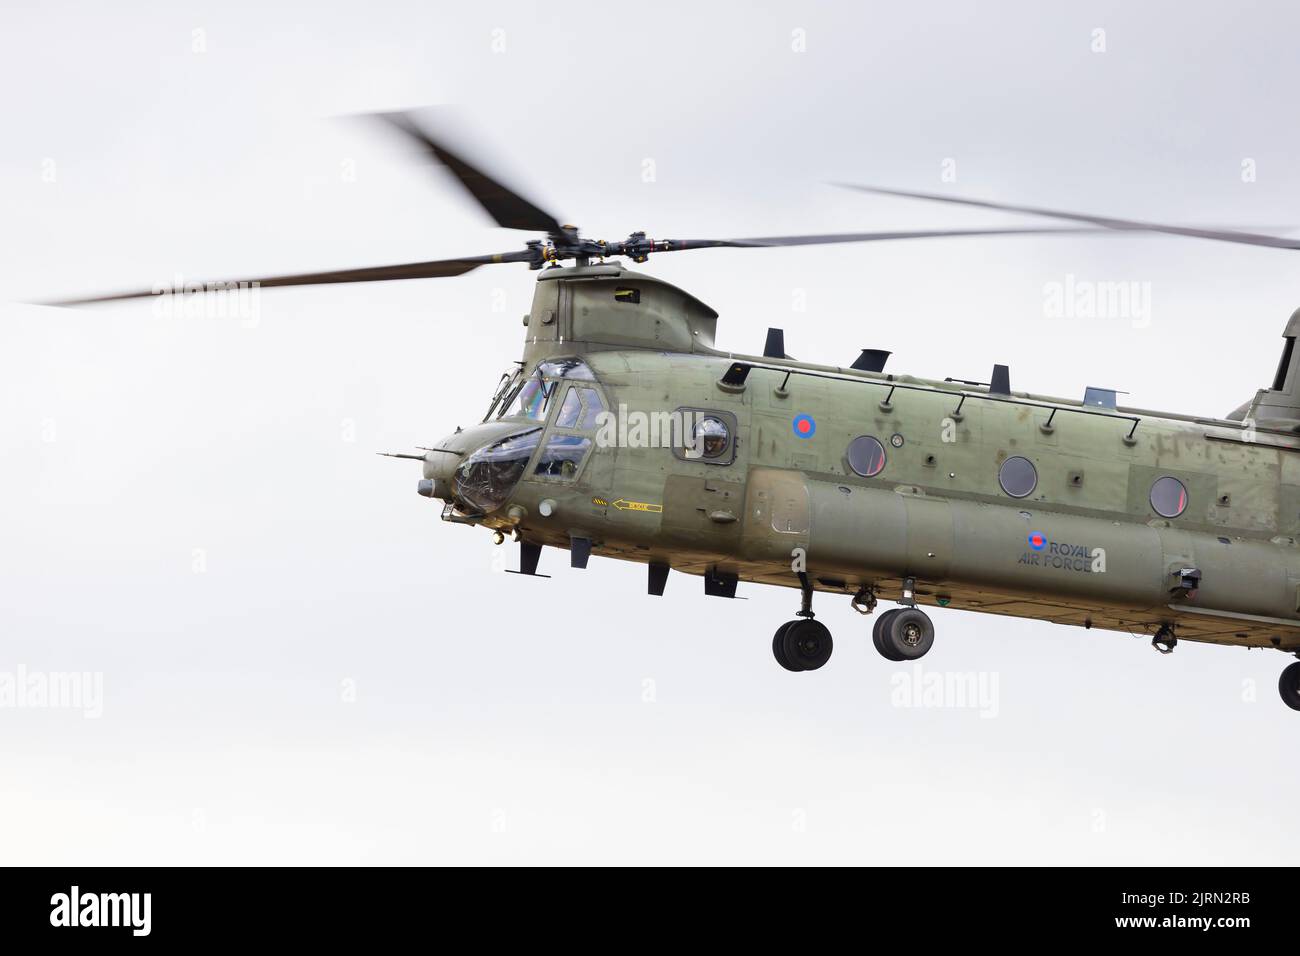 Boeing CH-47D Chinook heavy lift helicopter of the Royal Air Force Chinook Display Team, based at RAF Odiham, RAF Syerston families day. Stock Photo